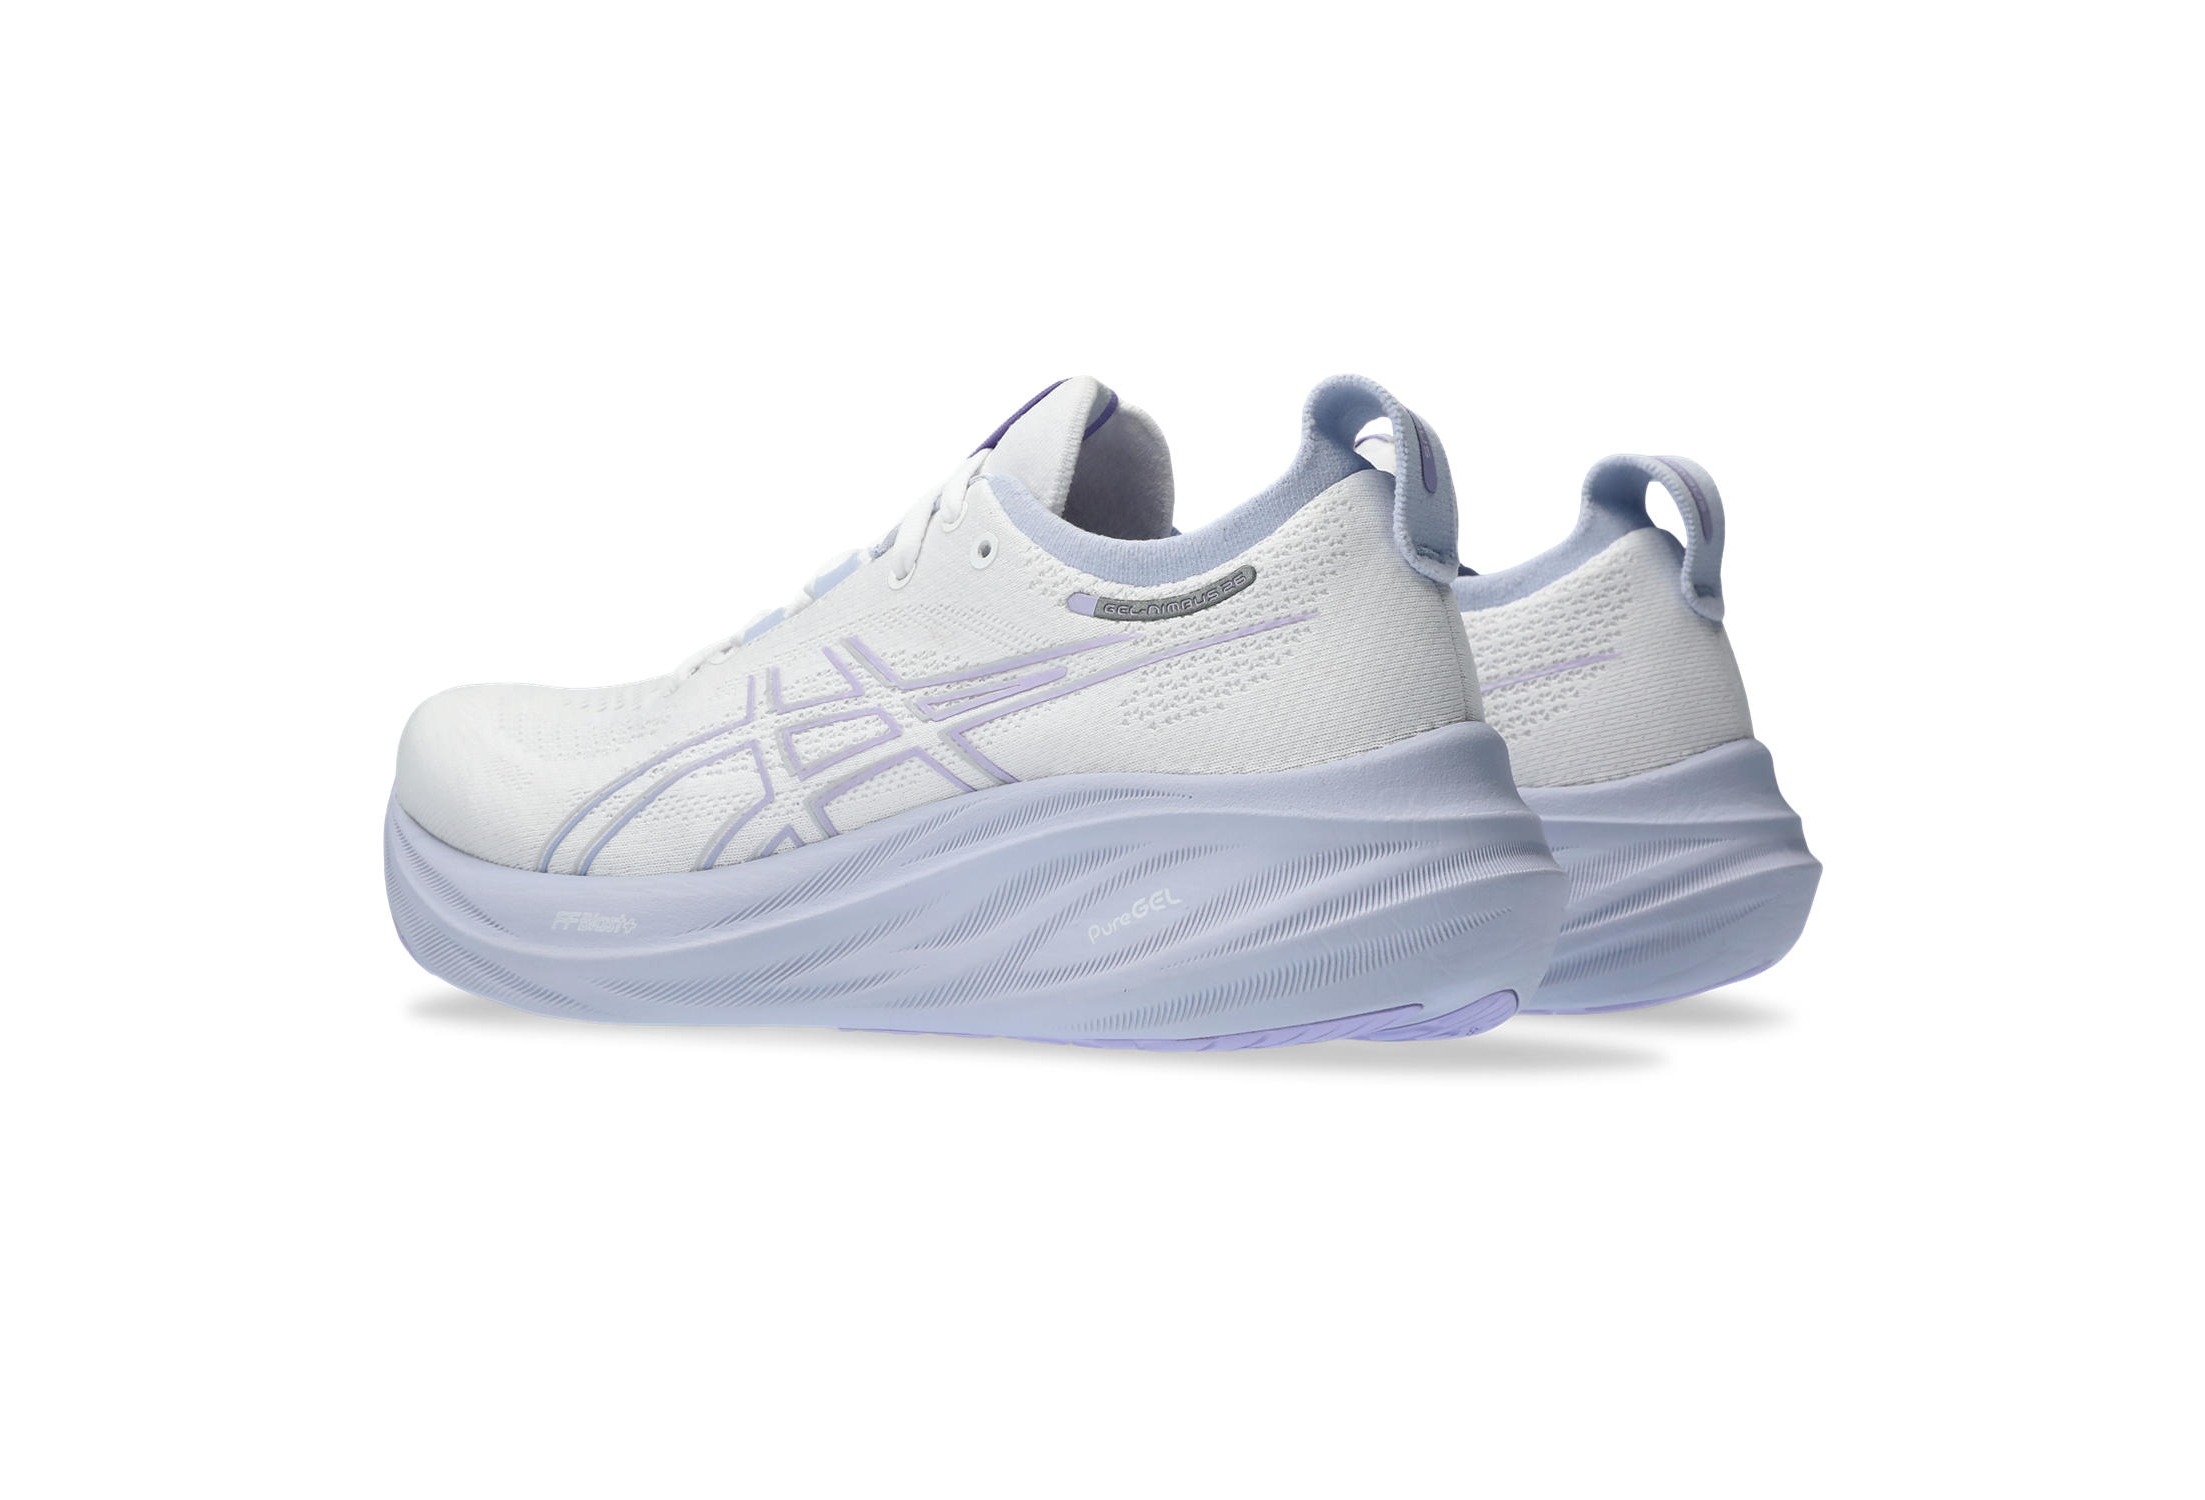 Nurses Wear These Asics Gel Contend 7 Sneakers for Long Shifts, and They're  on Sale at Amazon